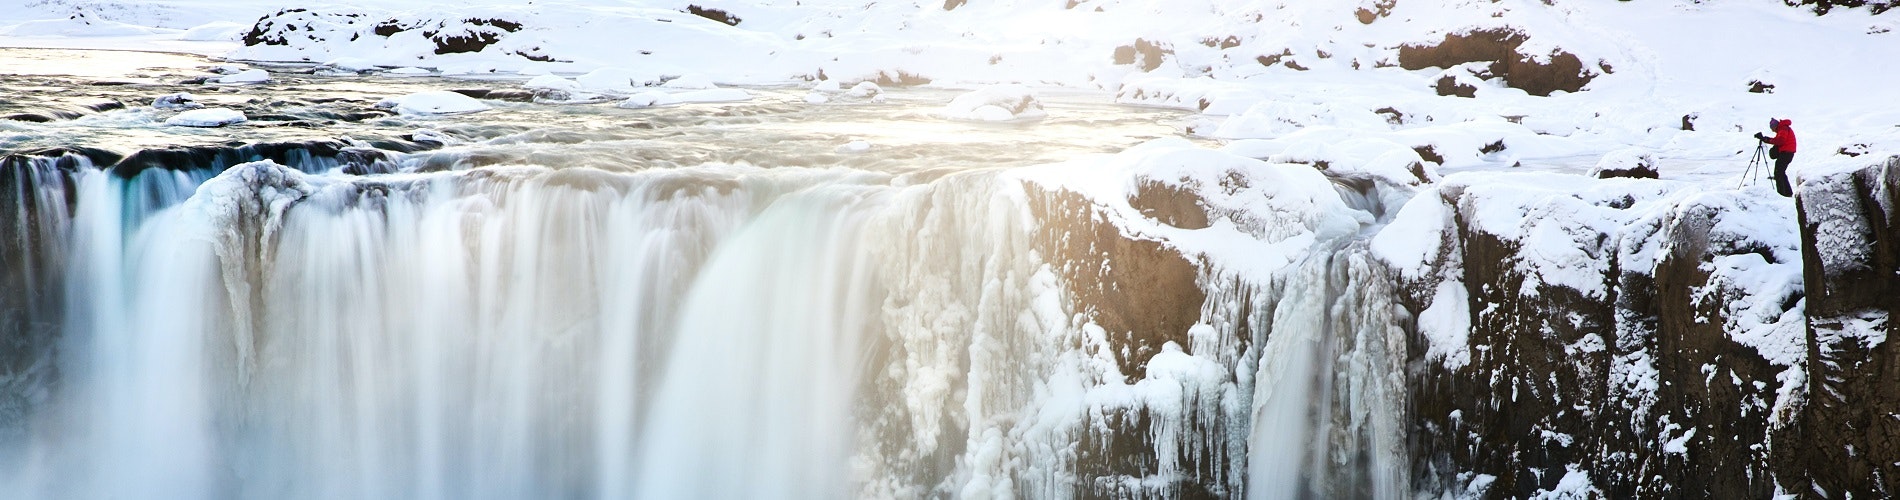 A waterfall in winter in Iceland